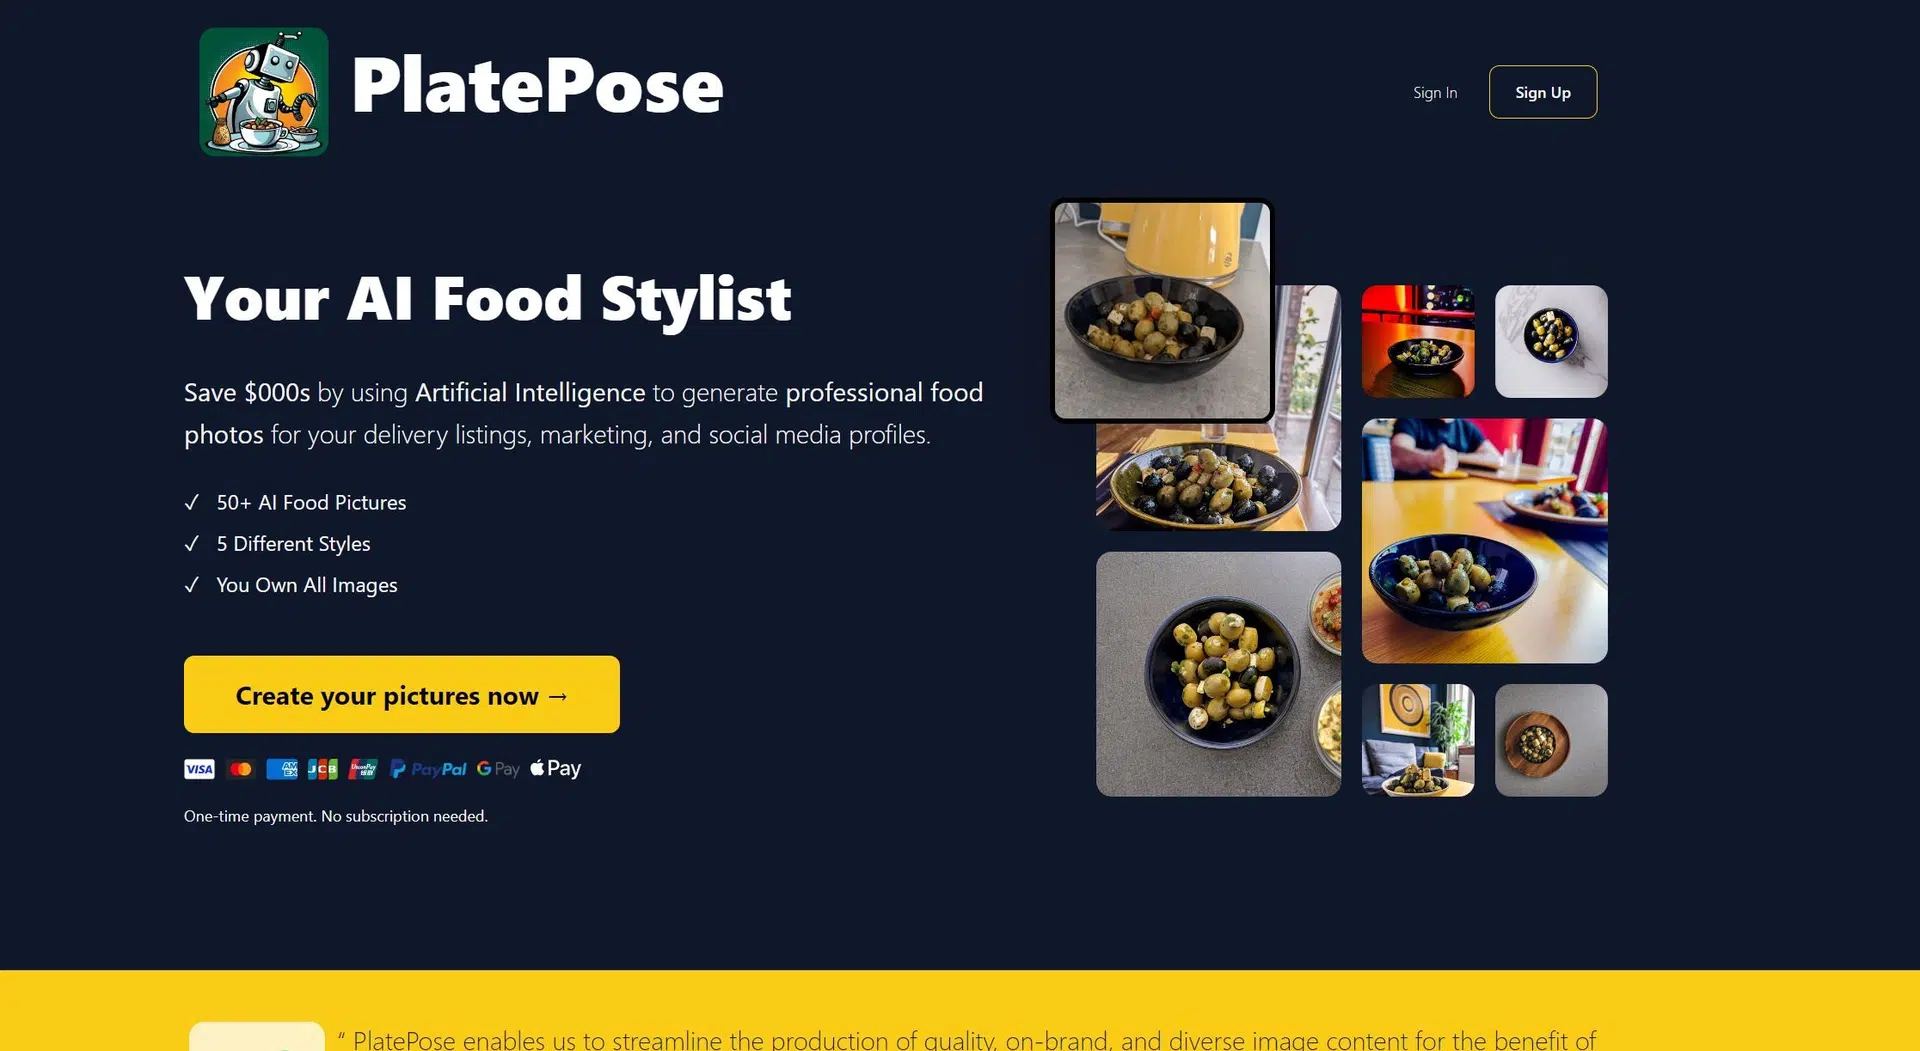 PlatePosewebsite picture